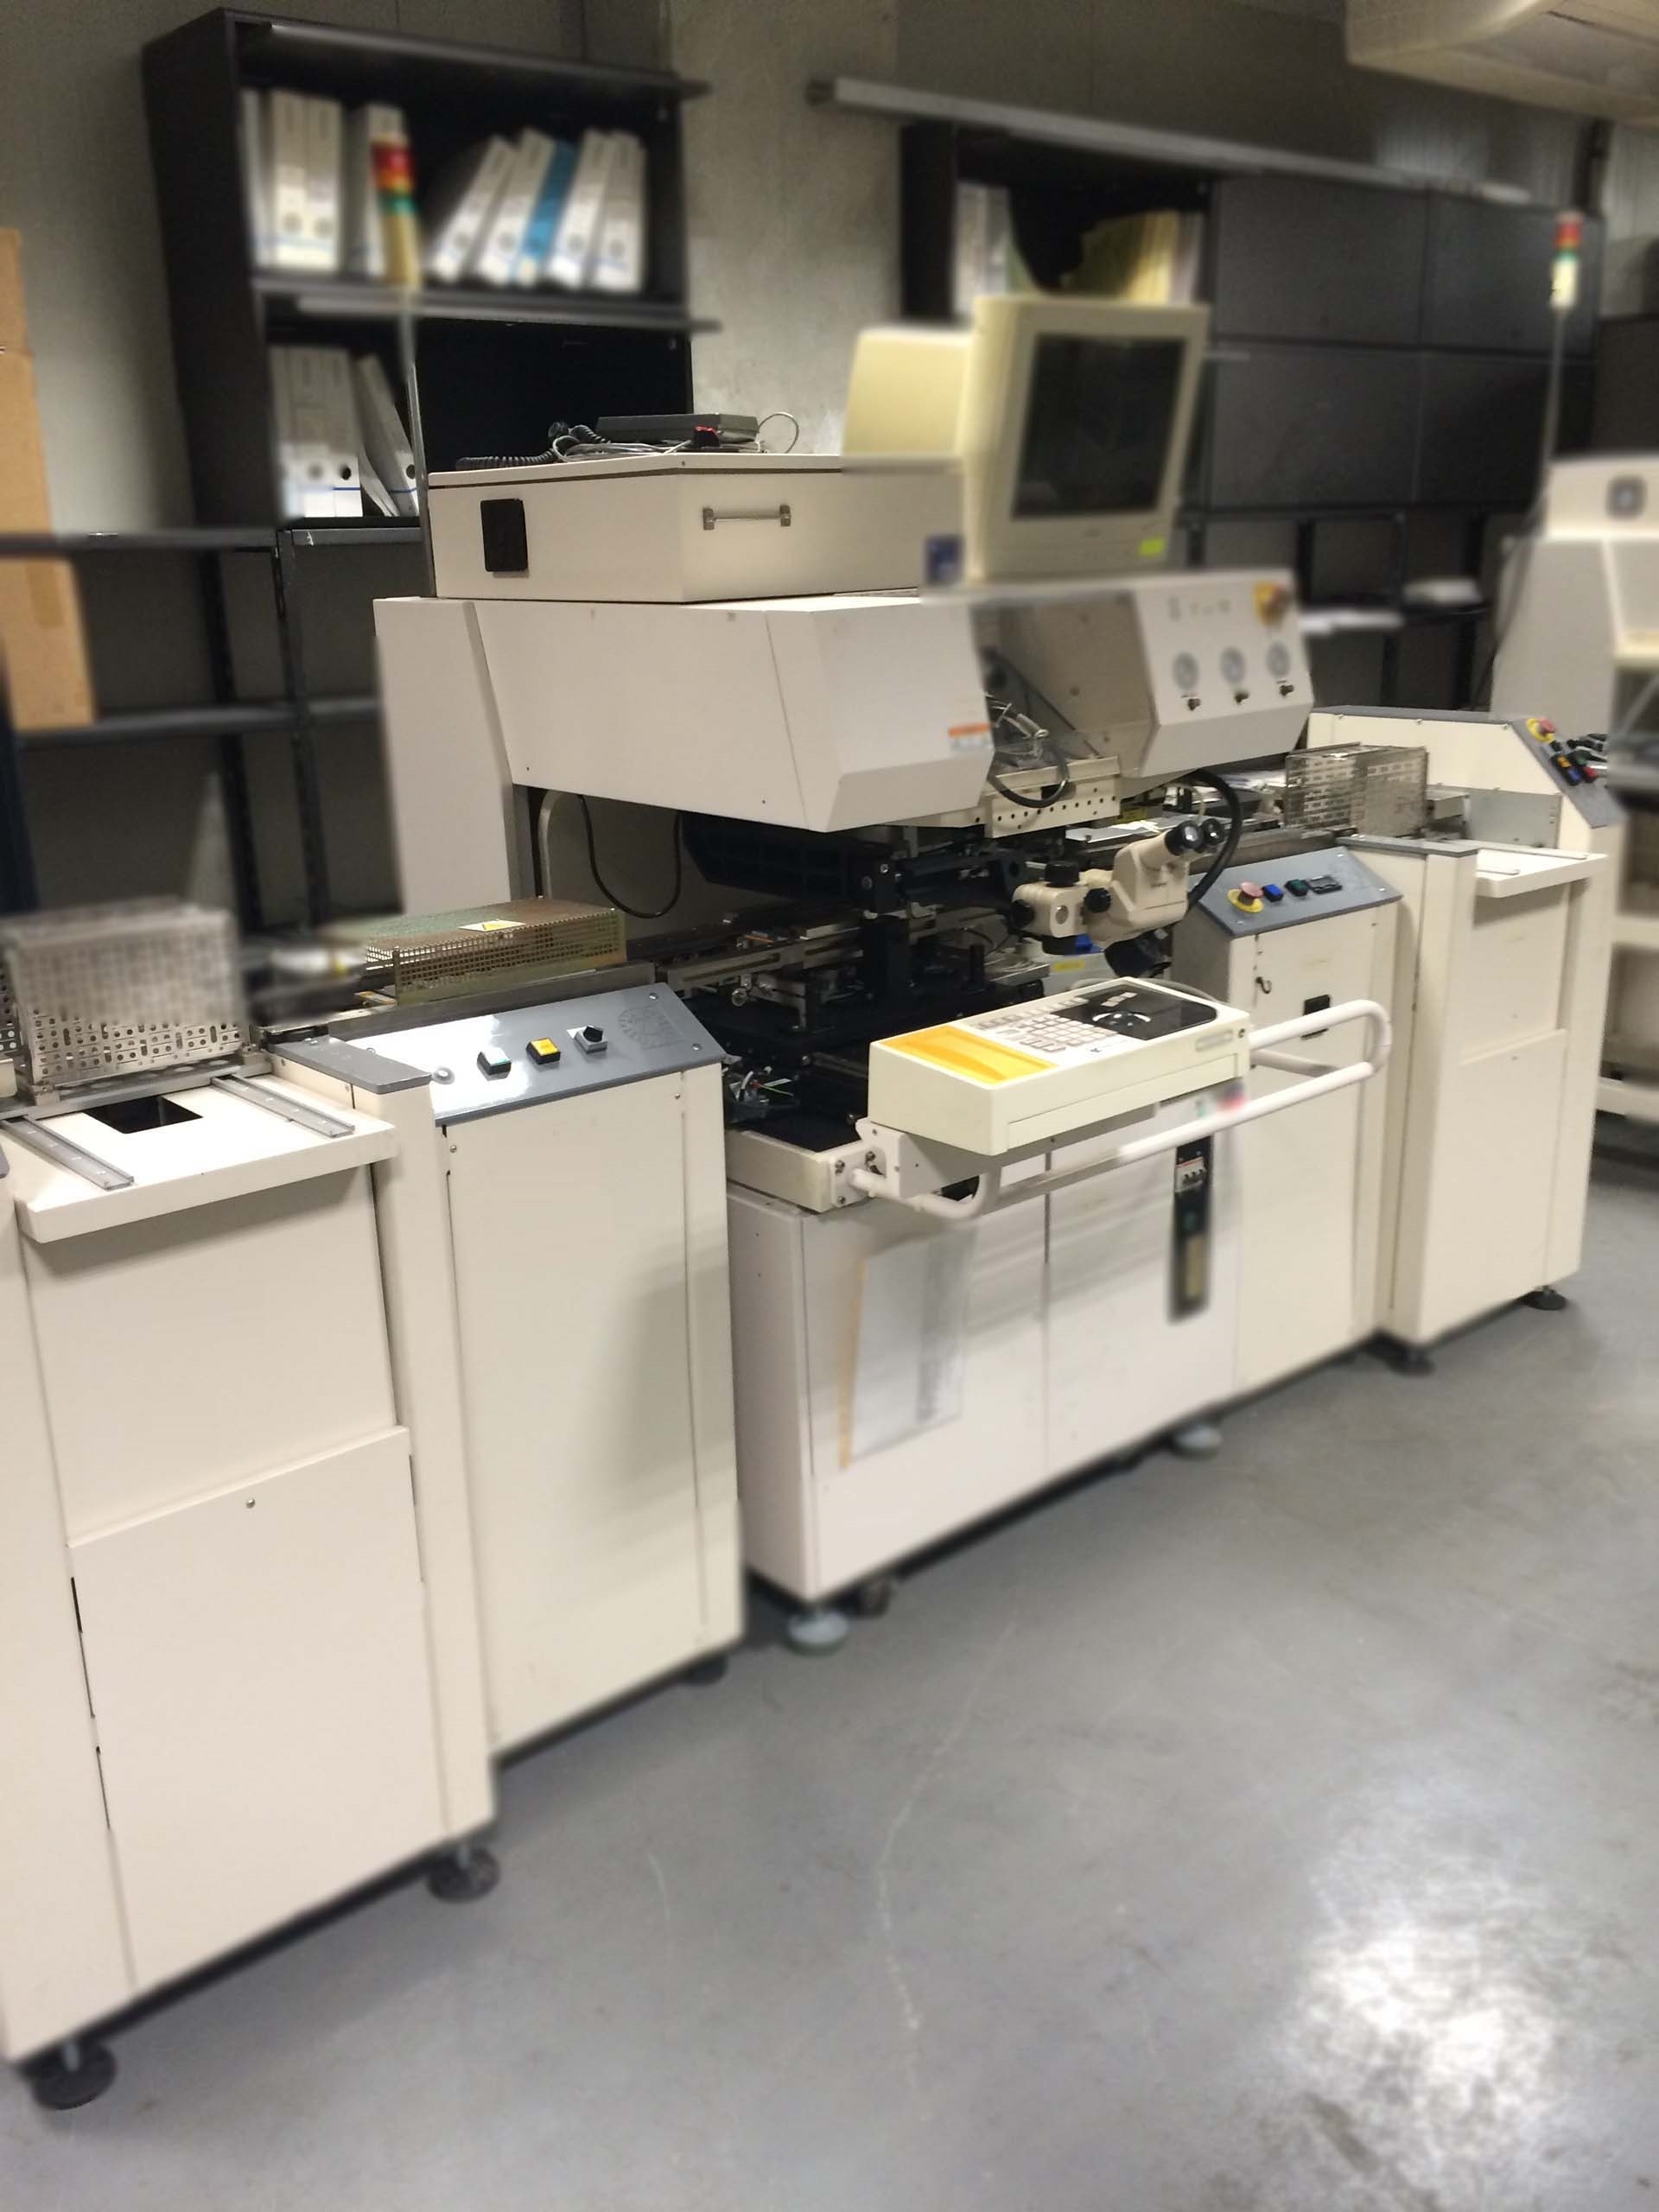 Photo Used MARTEK AUTOMATION 8090/98 WH For Sale